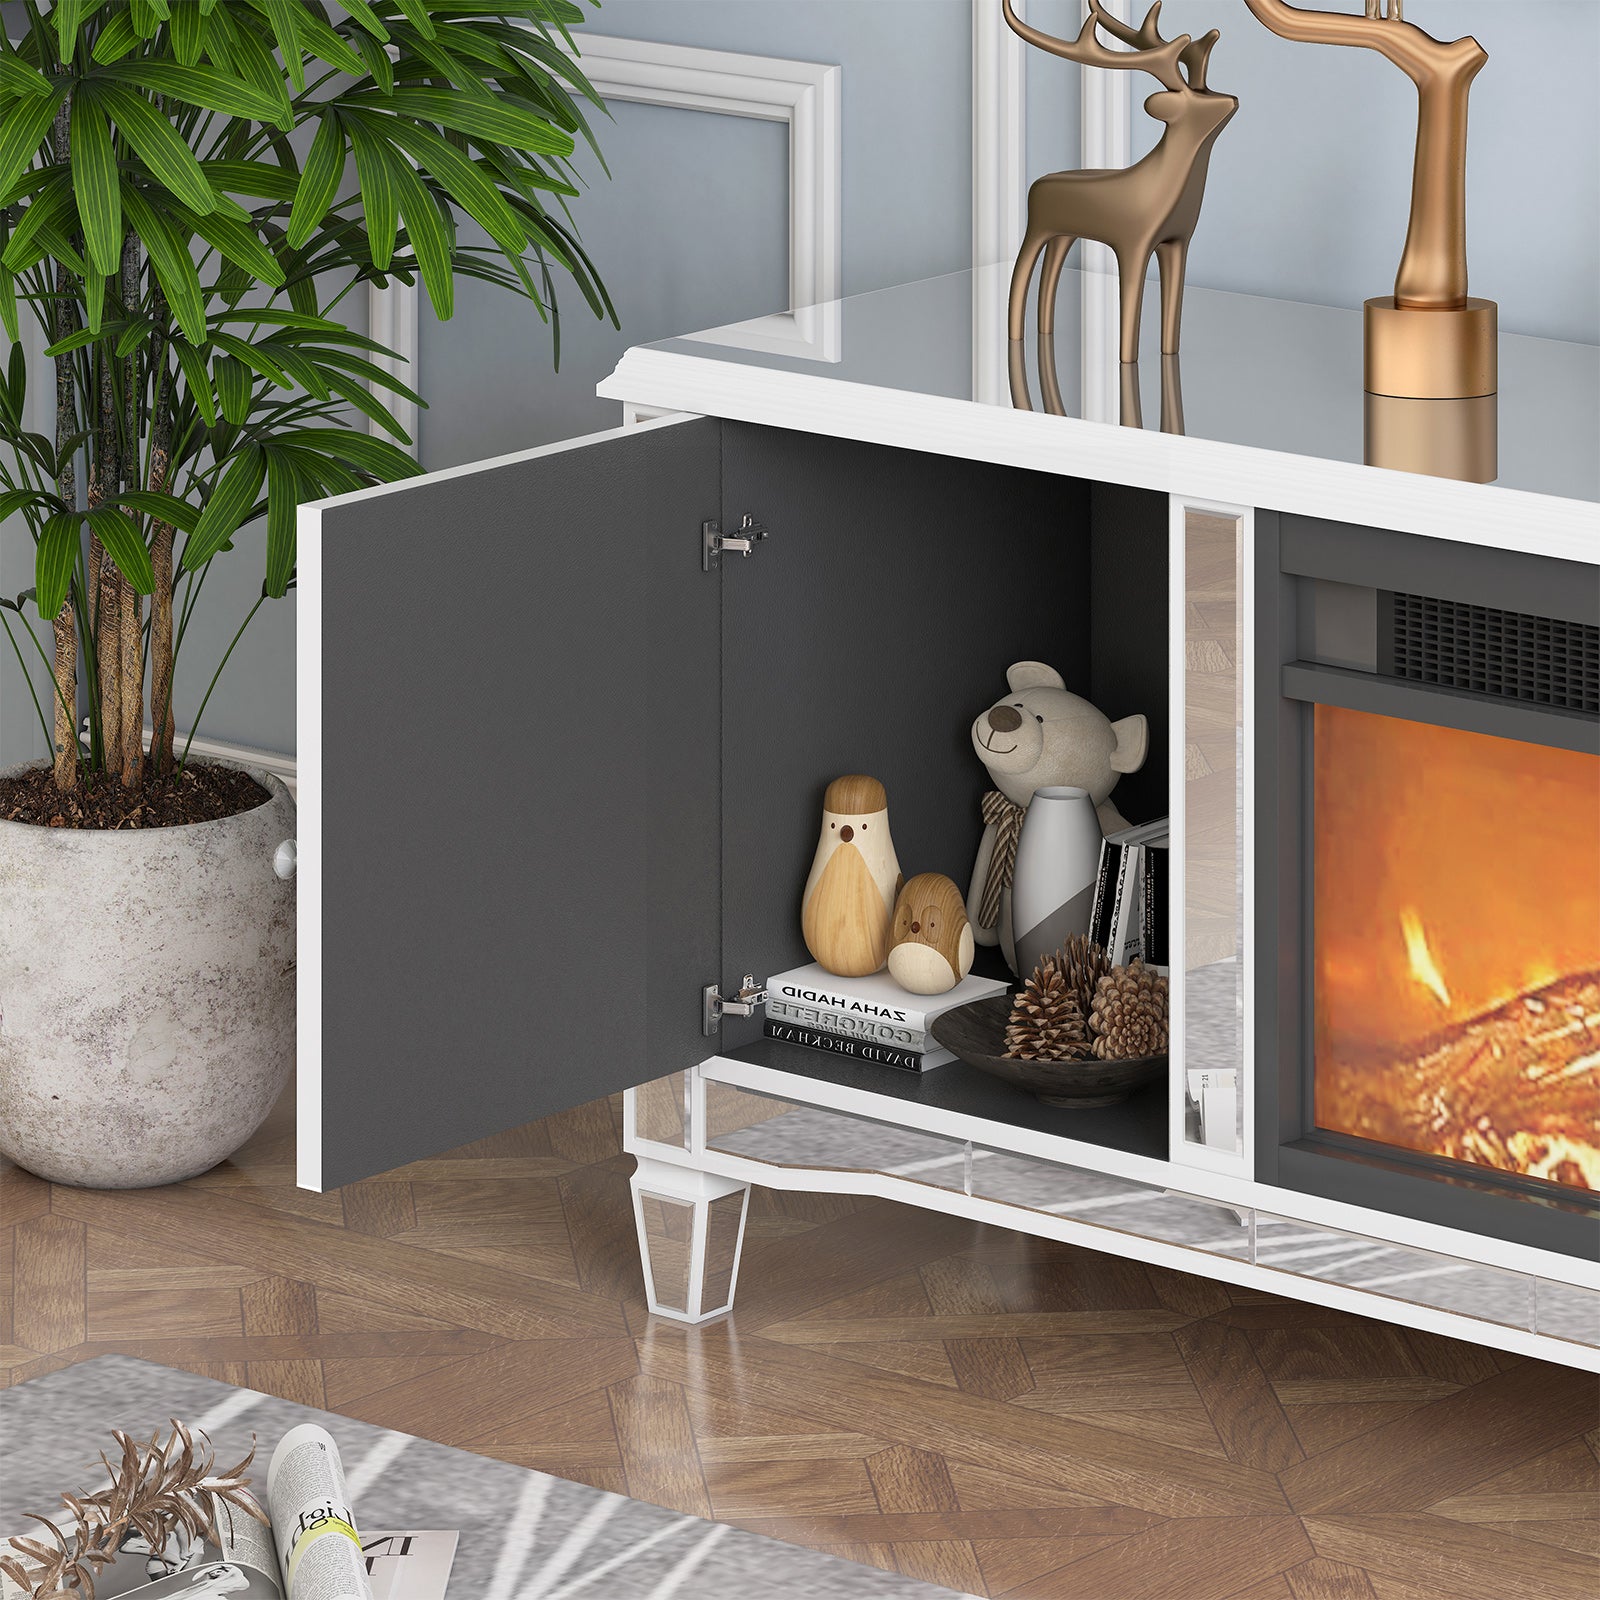 Mjkone Mirrored TV Stand with Heater Fireplace